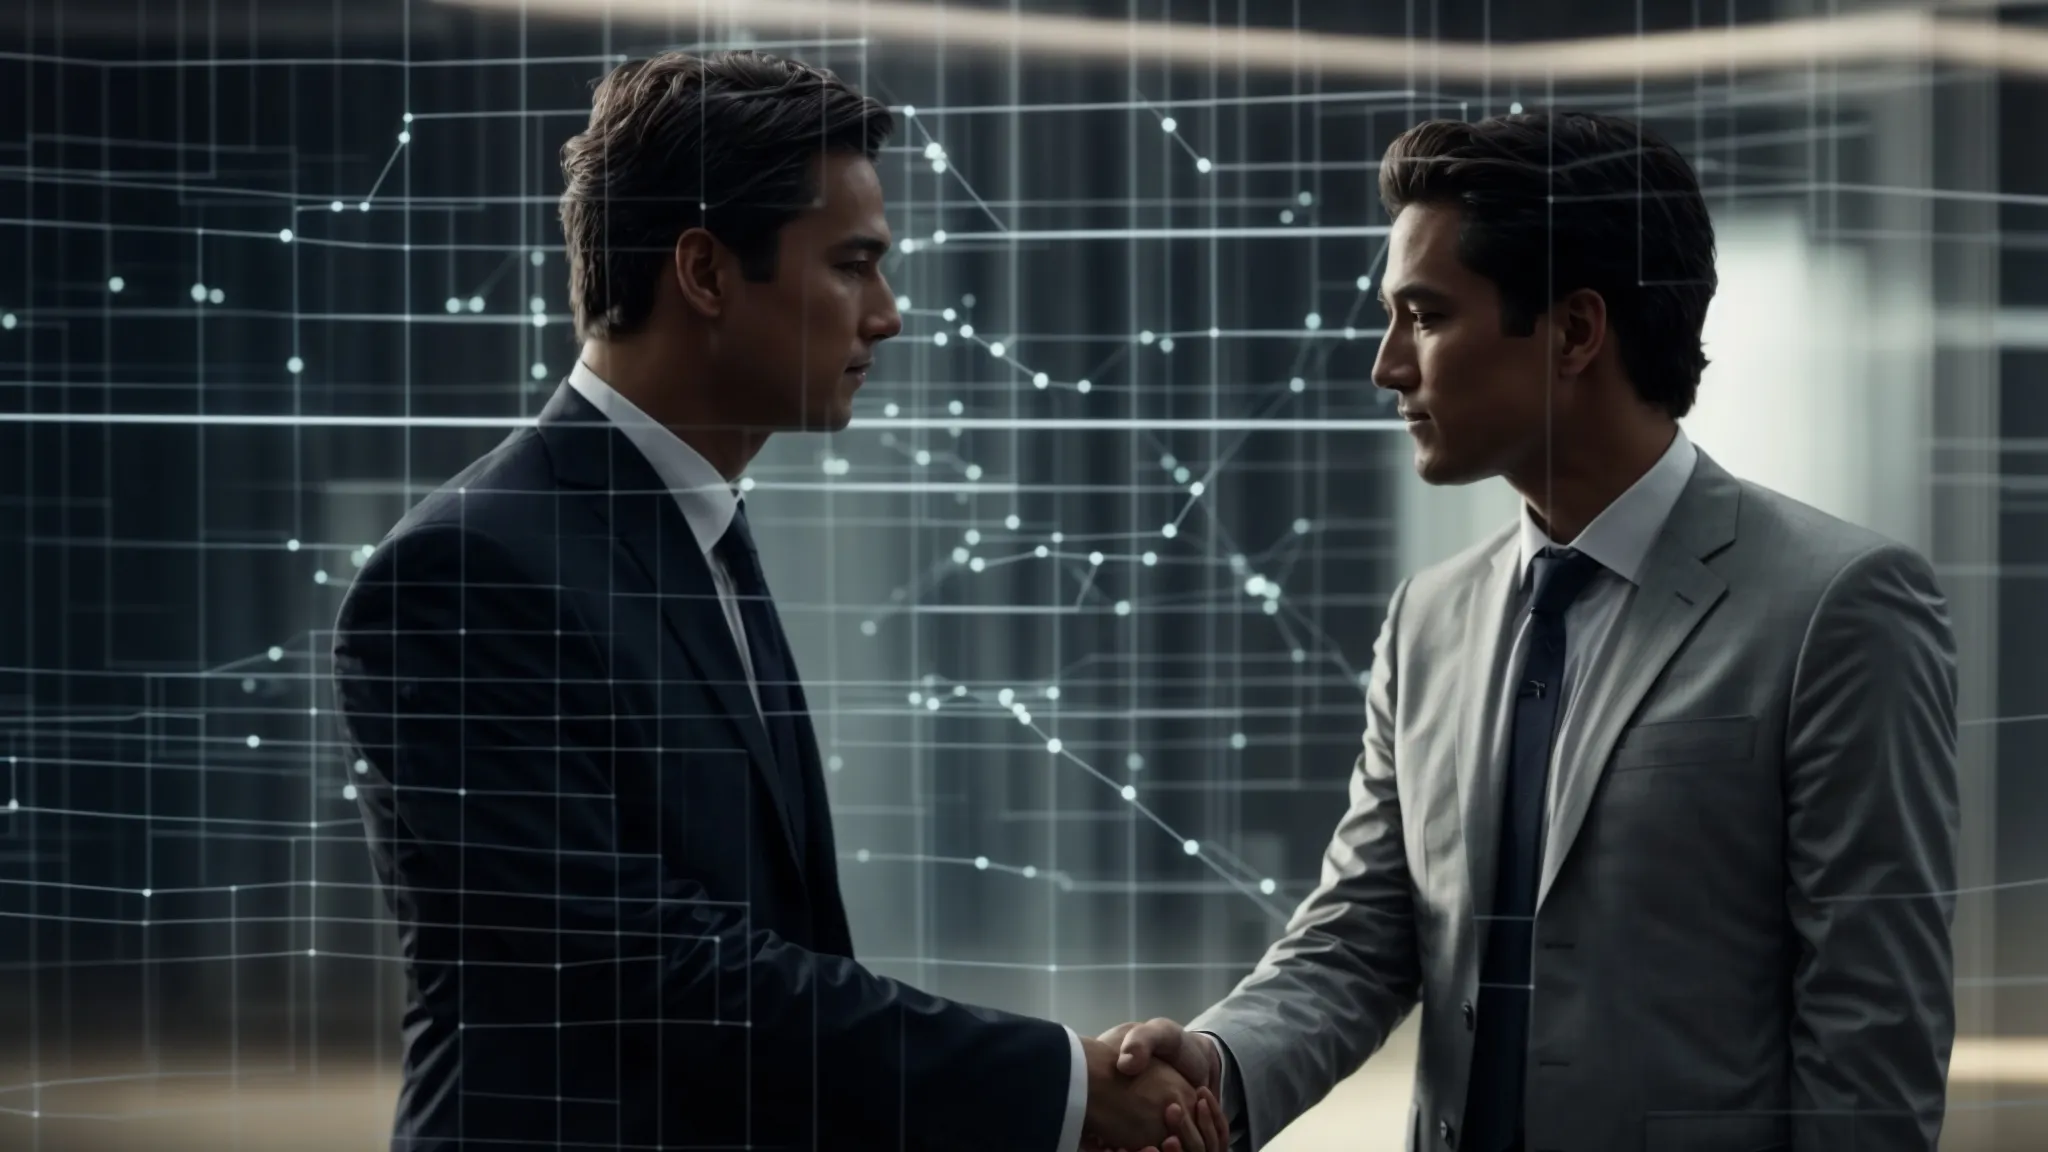 two business people shaking hands in front of a digital screen displaying interconnected web nodes.